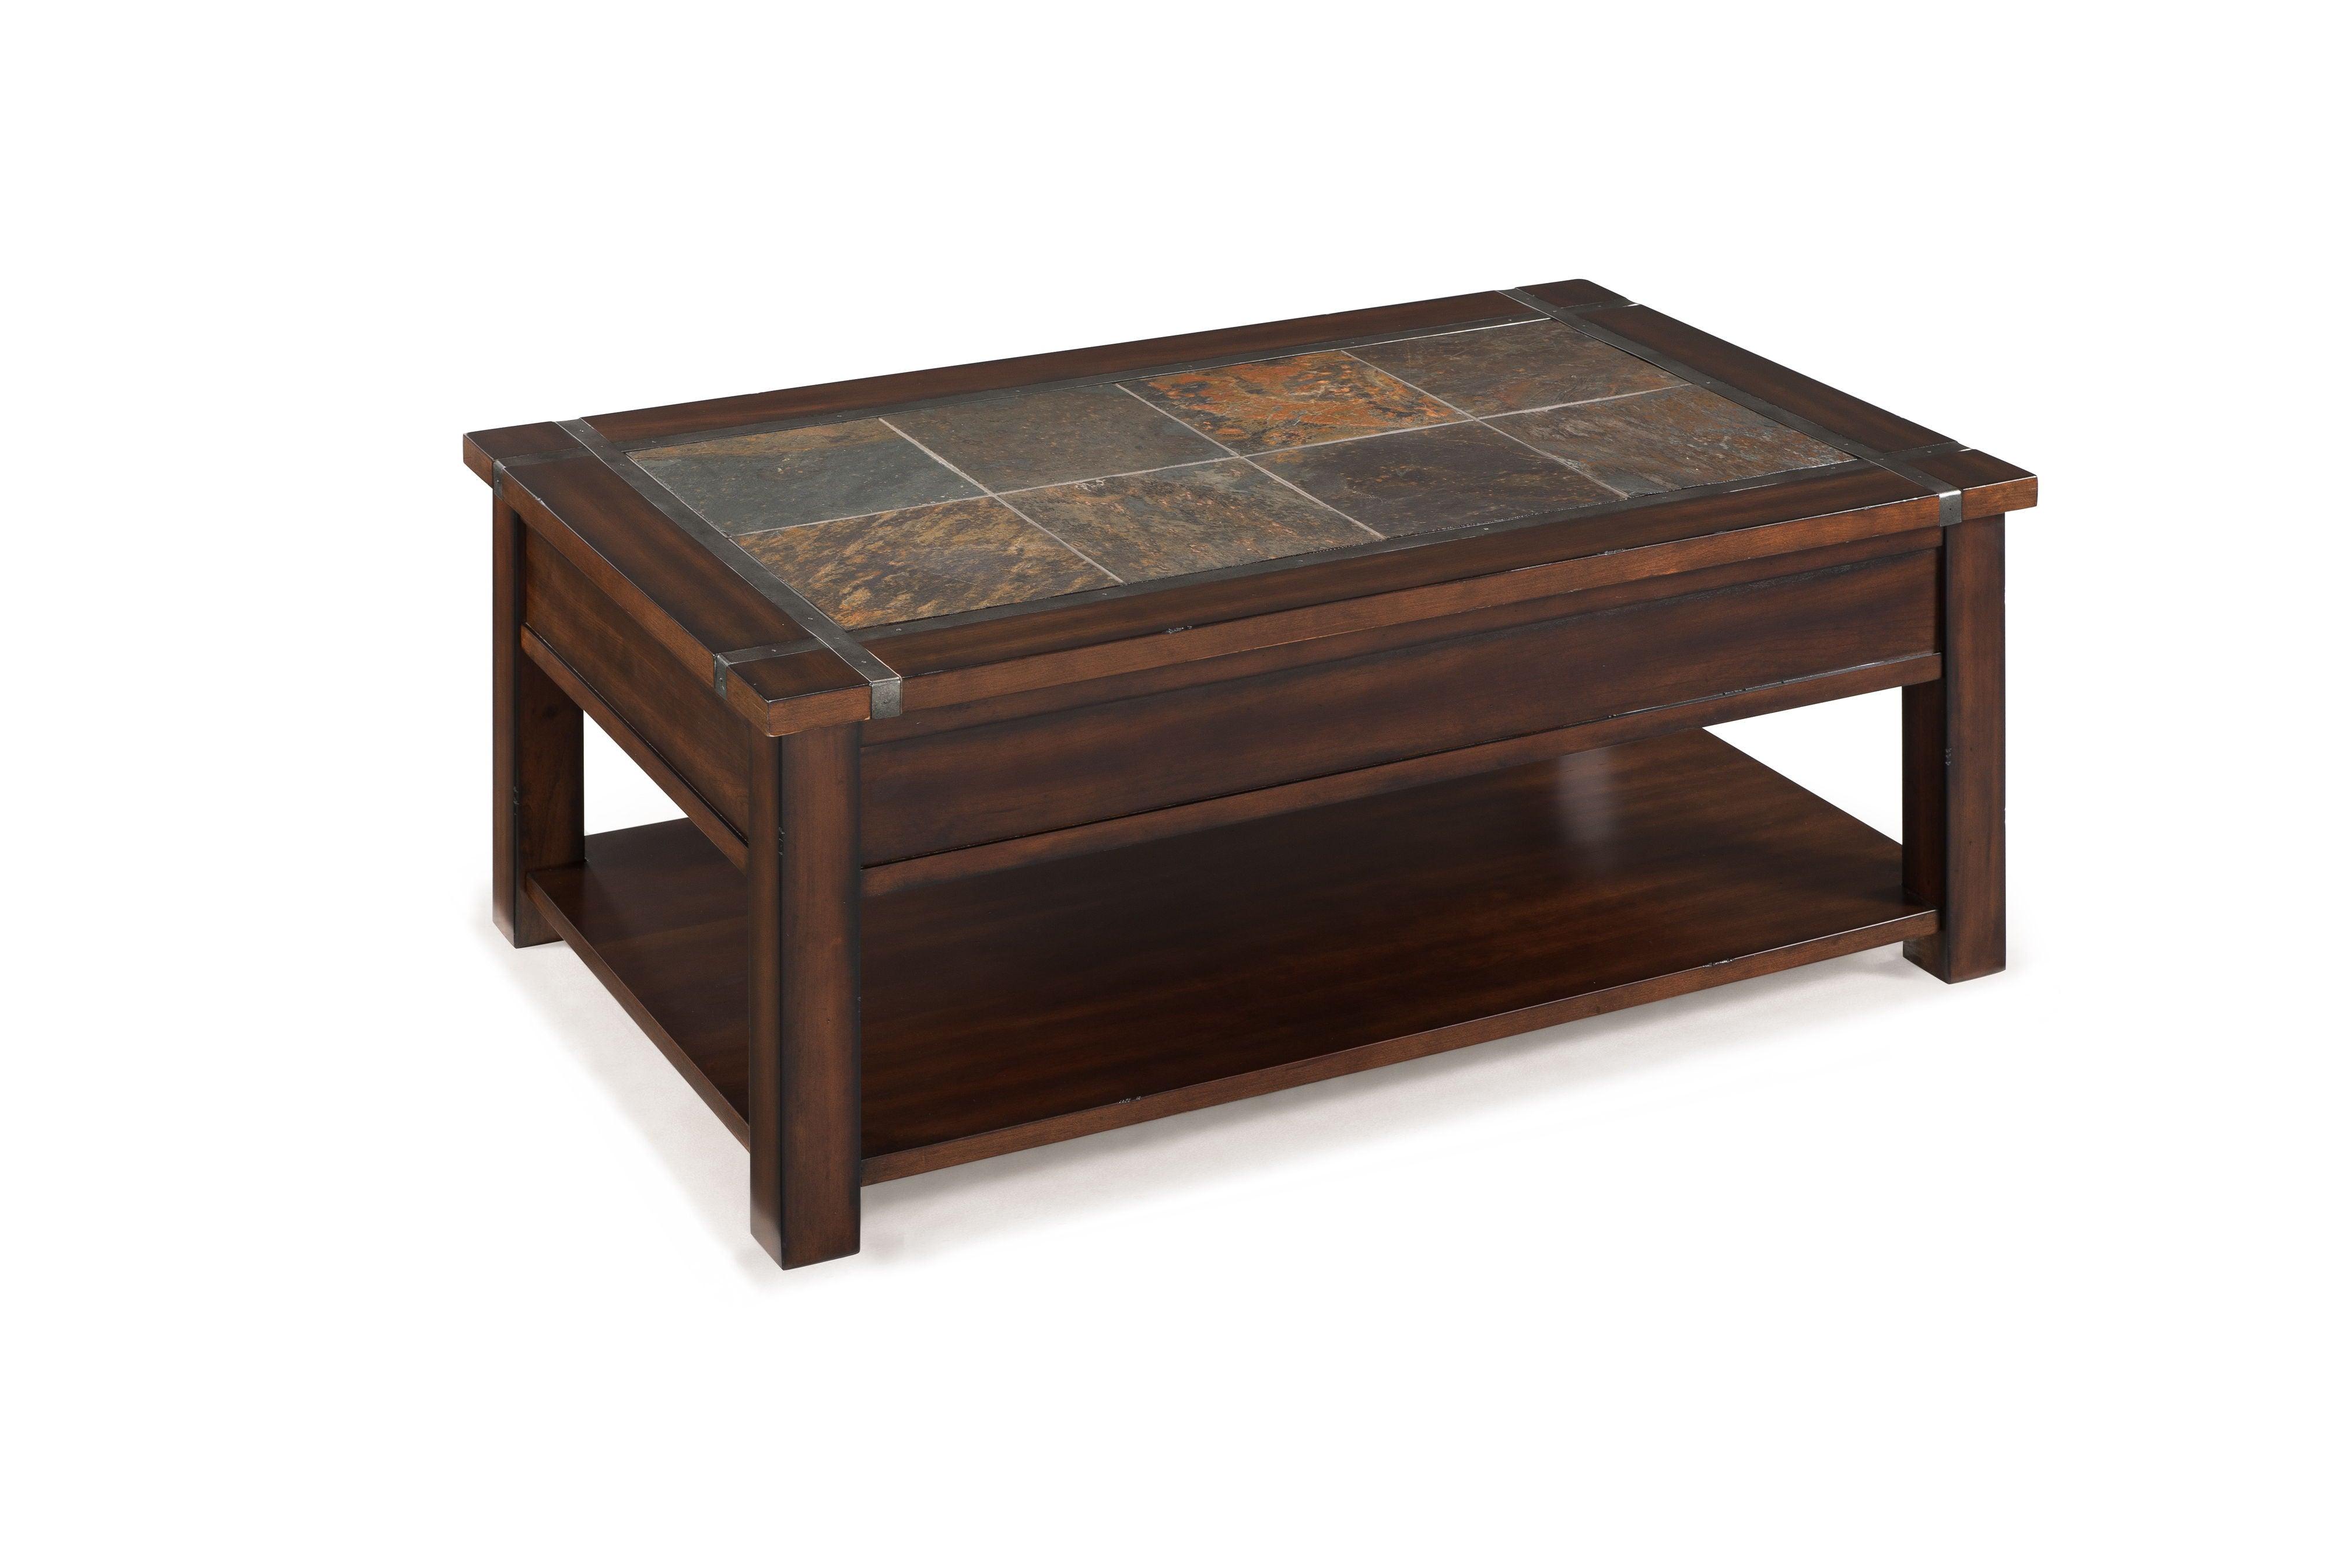 Magnussen Furniture - Roanoke - Rectangular Lift Top Cocktail Table (With Casters) - Cherry And Slate - 5th Avenue Furniture